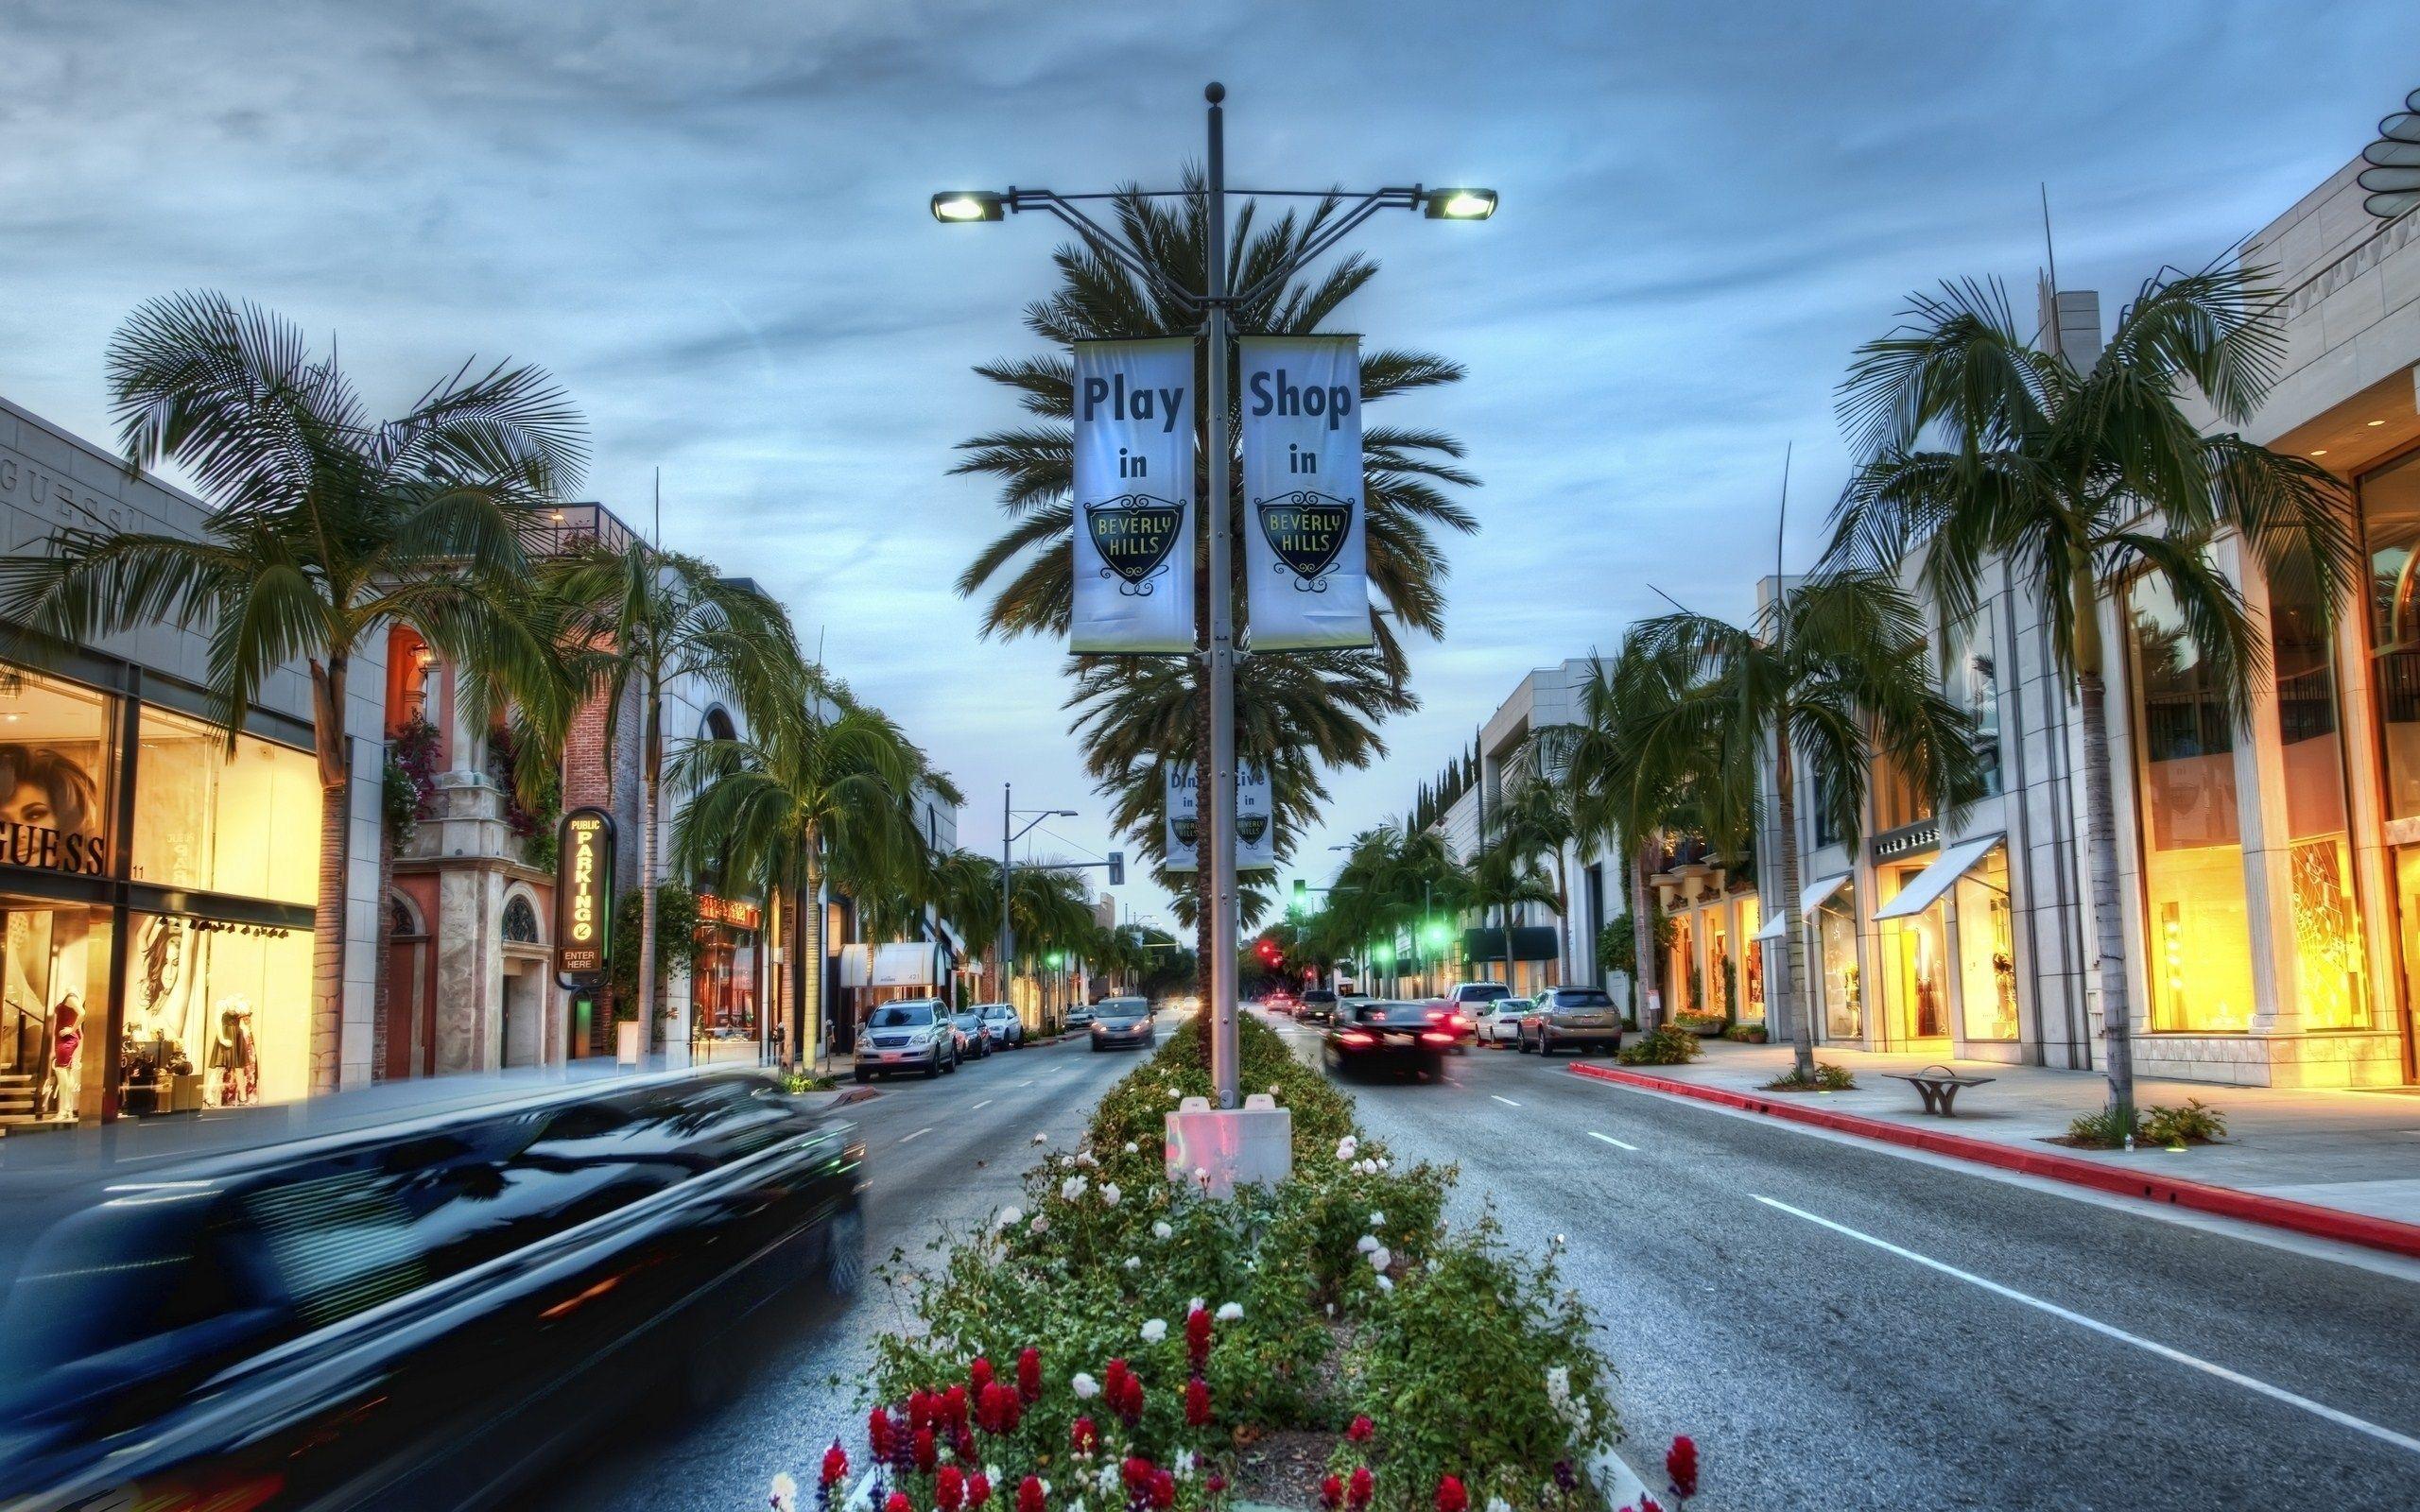 Los Angeles Palm Trees Wallpapers Top Free Los Angeles Palm Trees